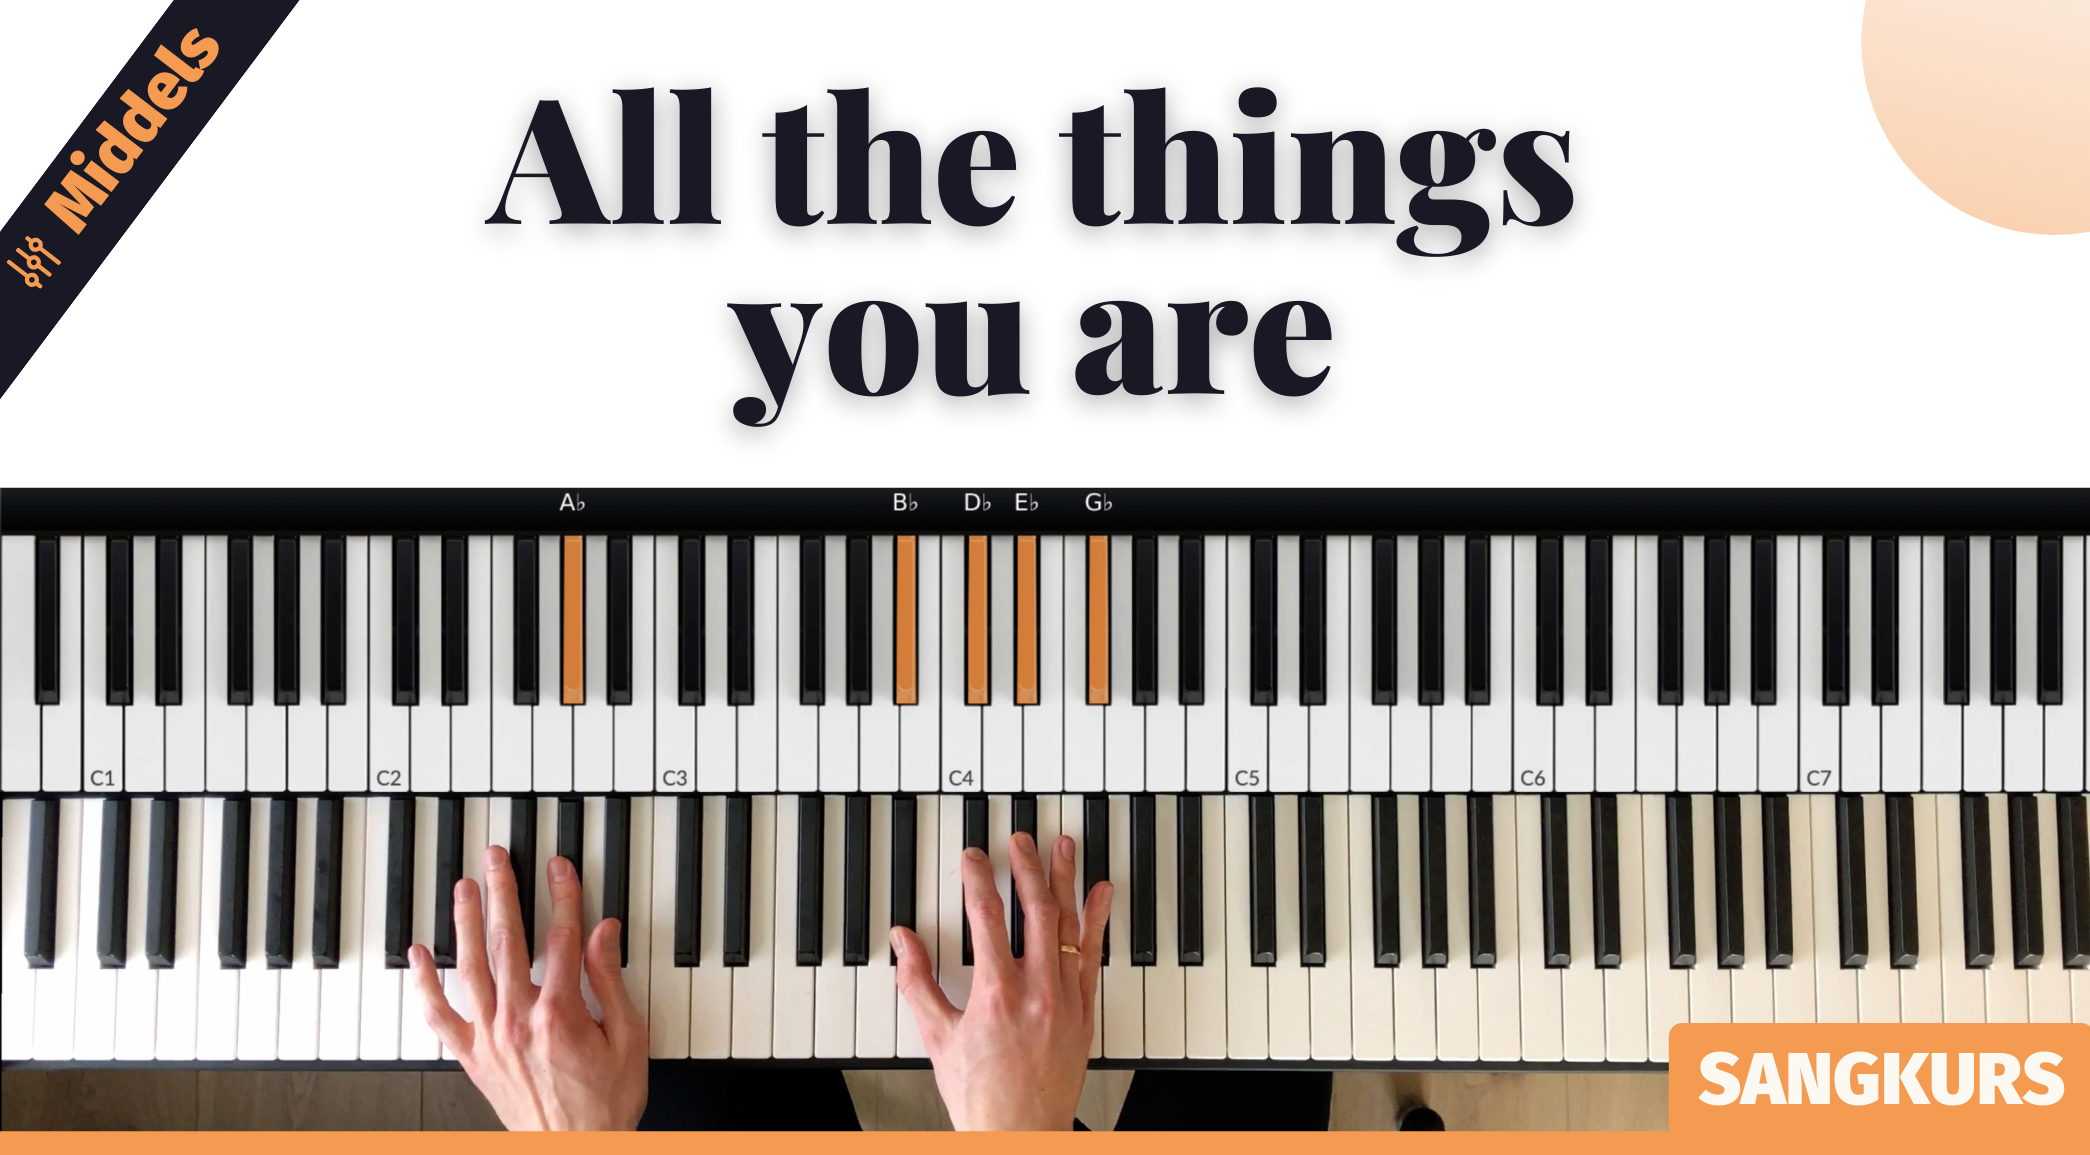 Nytt sangkurs: "All the things you are"